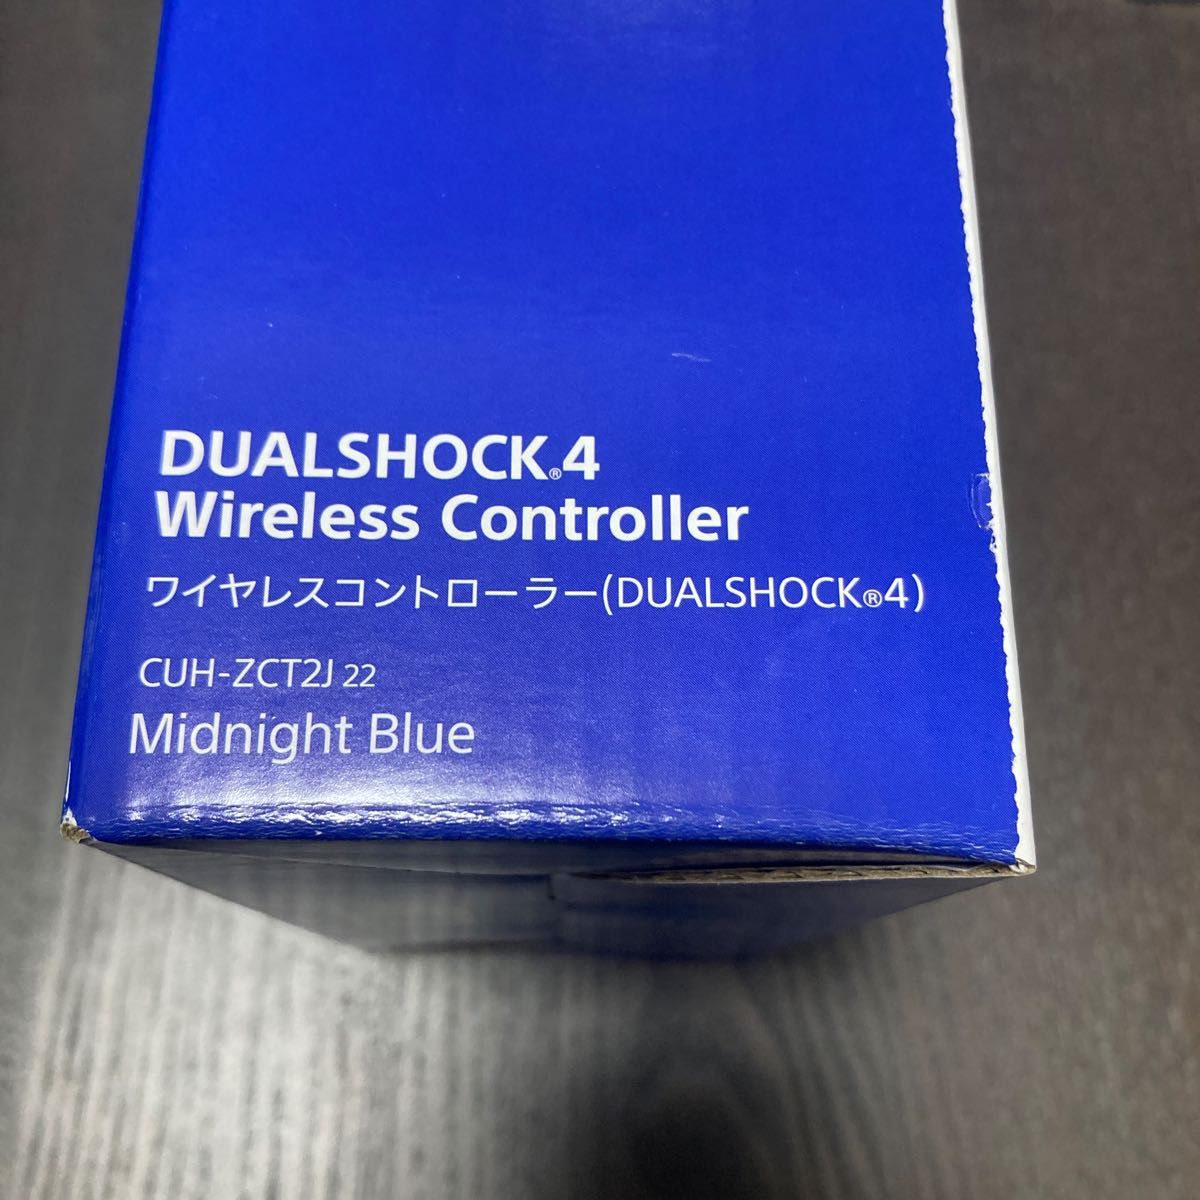 PS4 ワイヤレスコントローラー（DUALSHOCK 4） Midnight Blue CUH-ZCT2J22